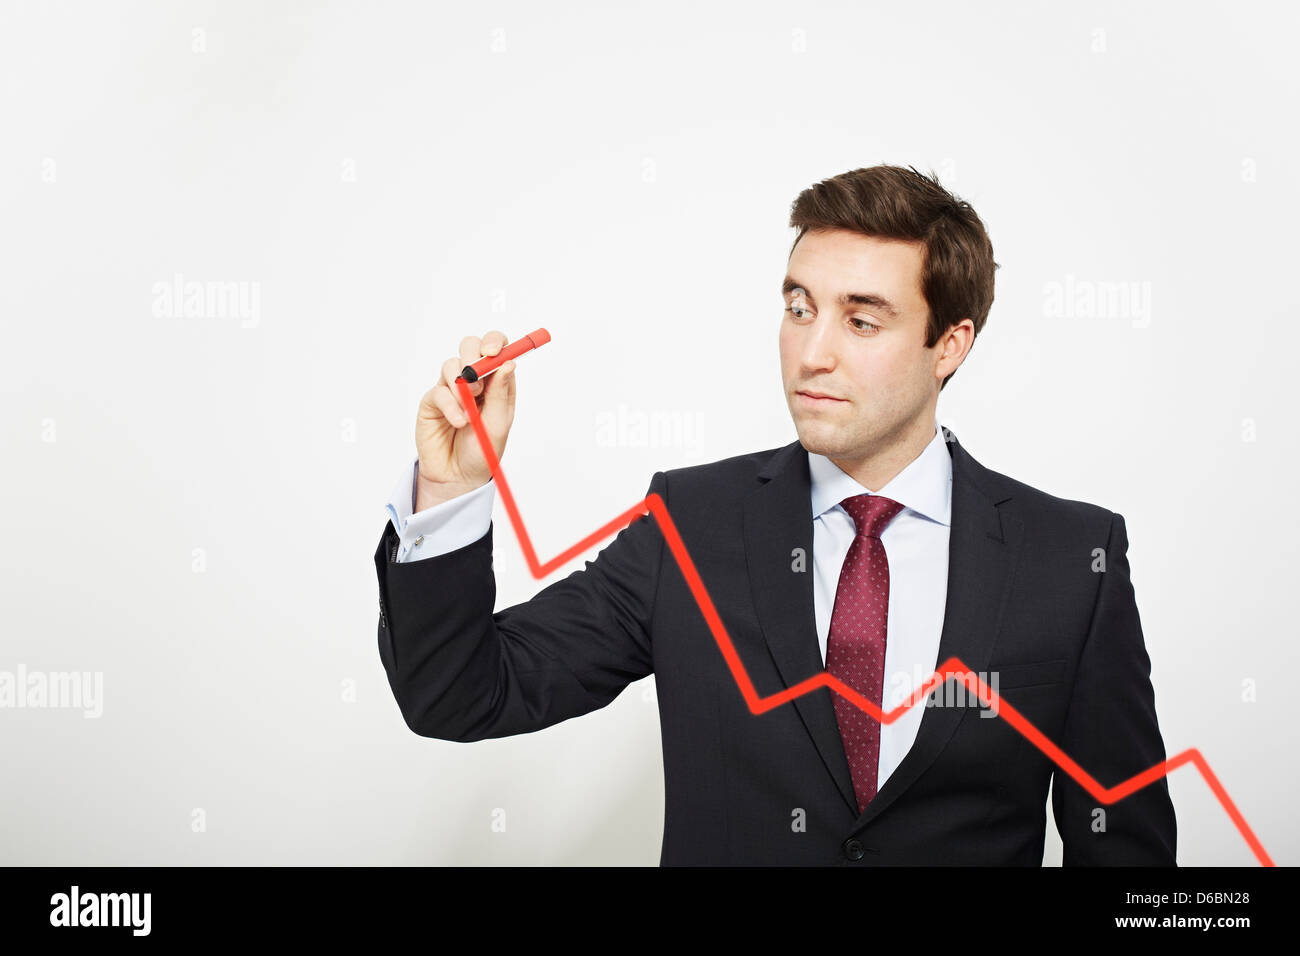 Businessman drawing graph in air Stock Photo